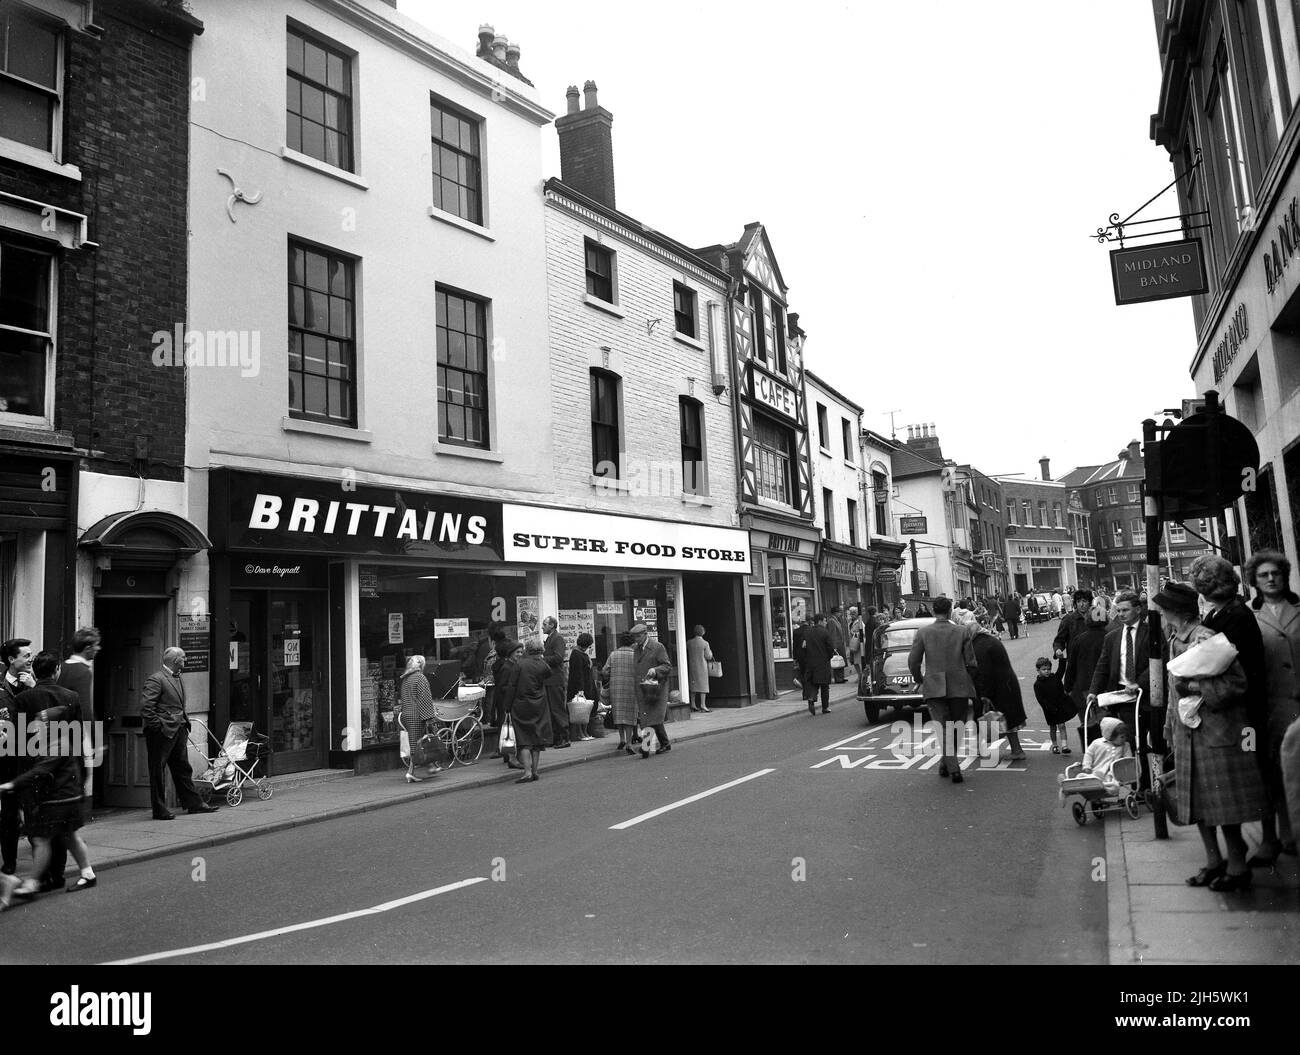 British high street shops in Wellington, Shropshire 1965. PICTURE BY DAVID BAGNALL Stock Photo